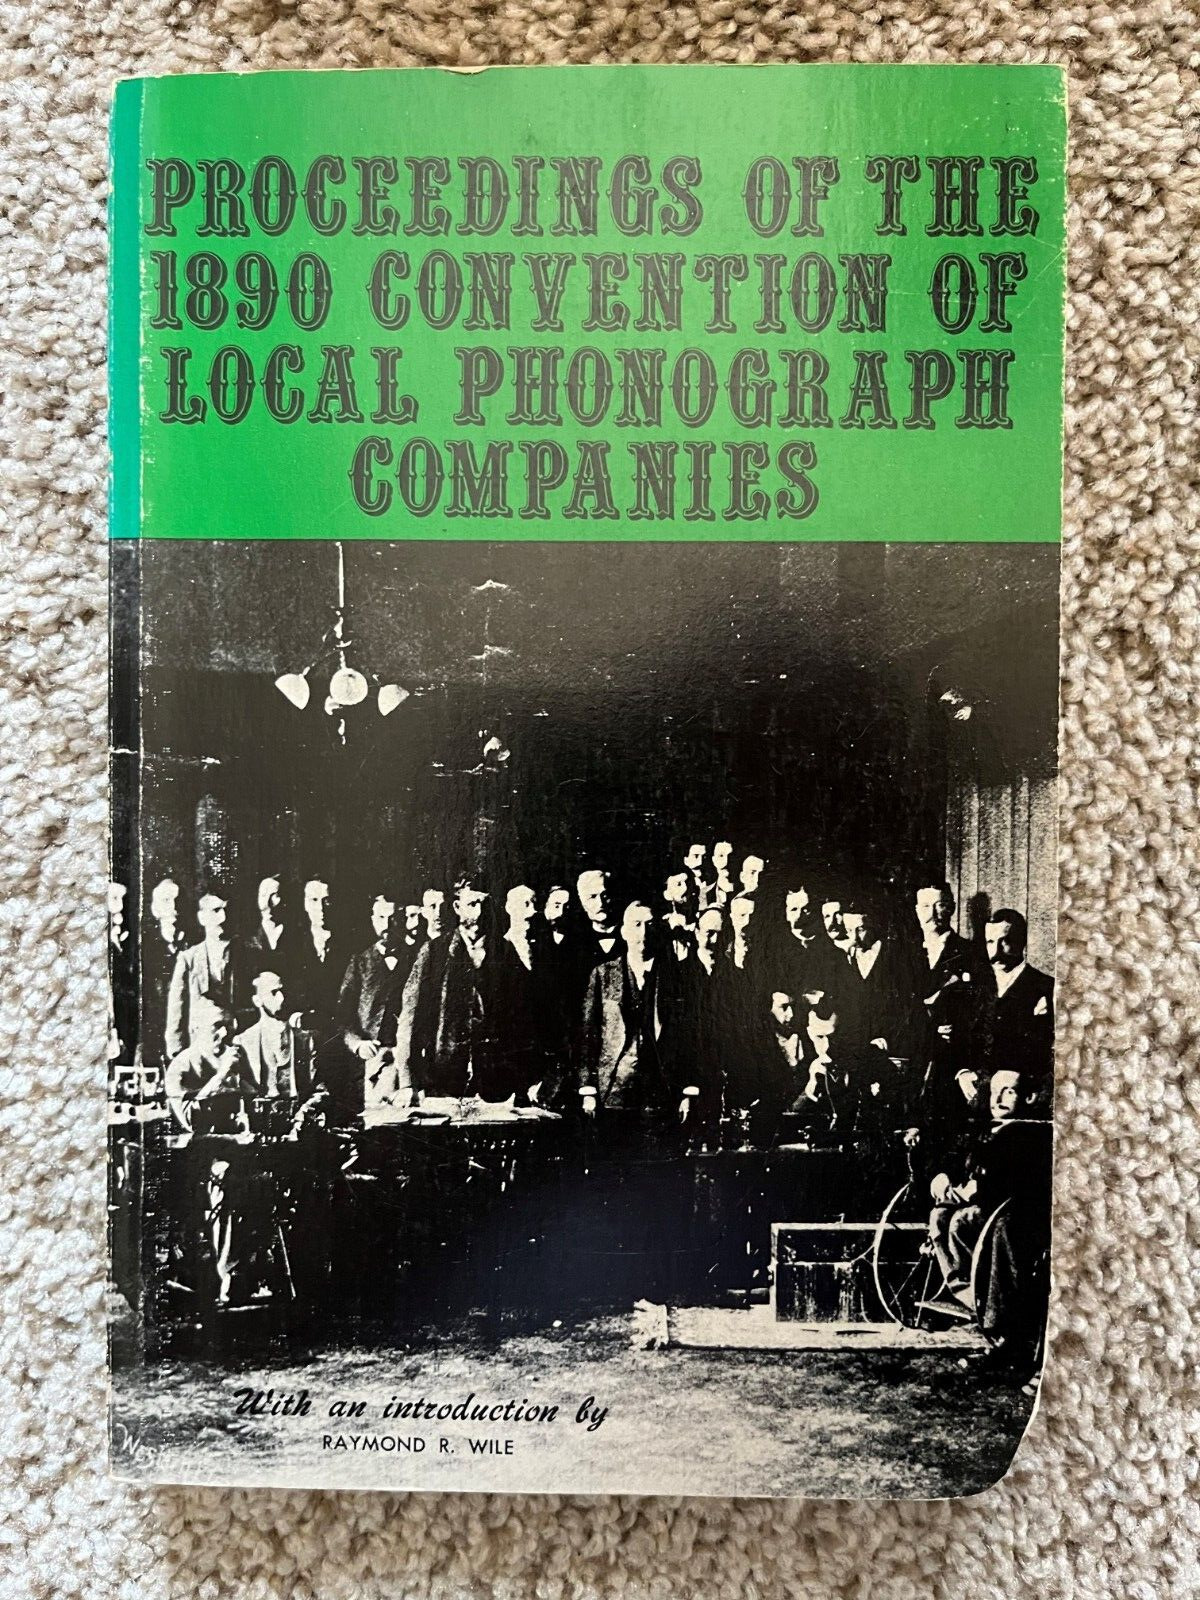 Proceedings of the 1890 Convention of Local Phonograph Companies - Reprint 1974